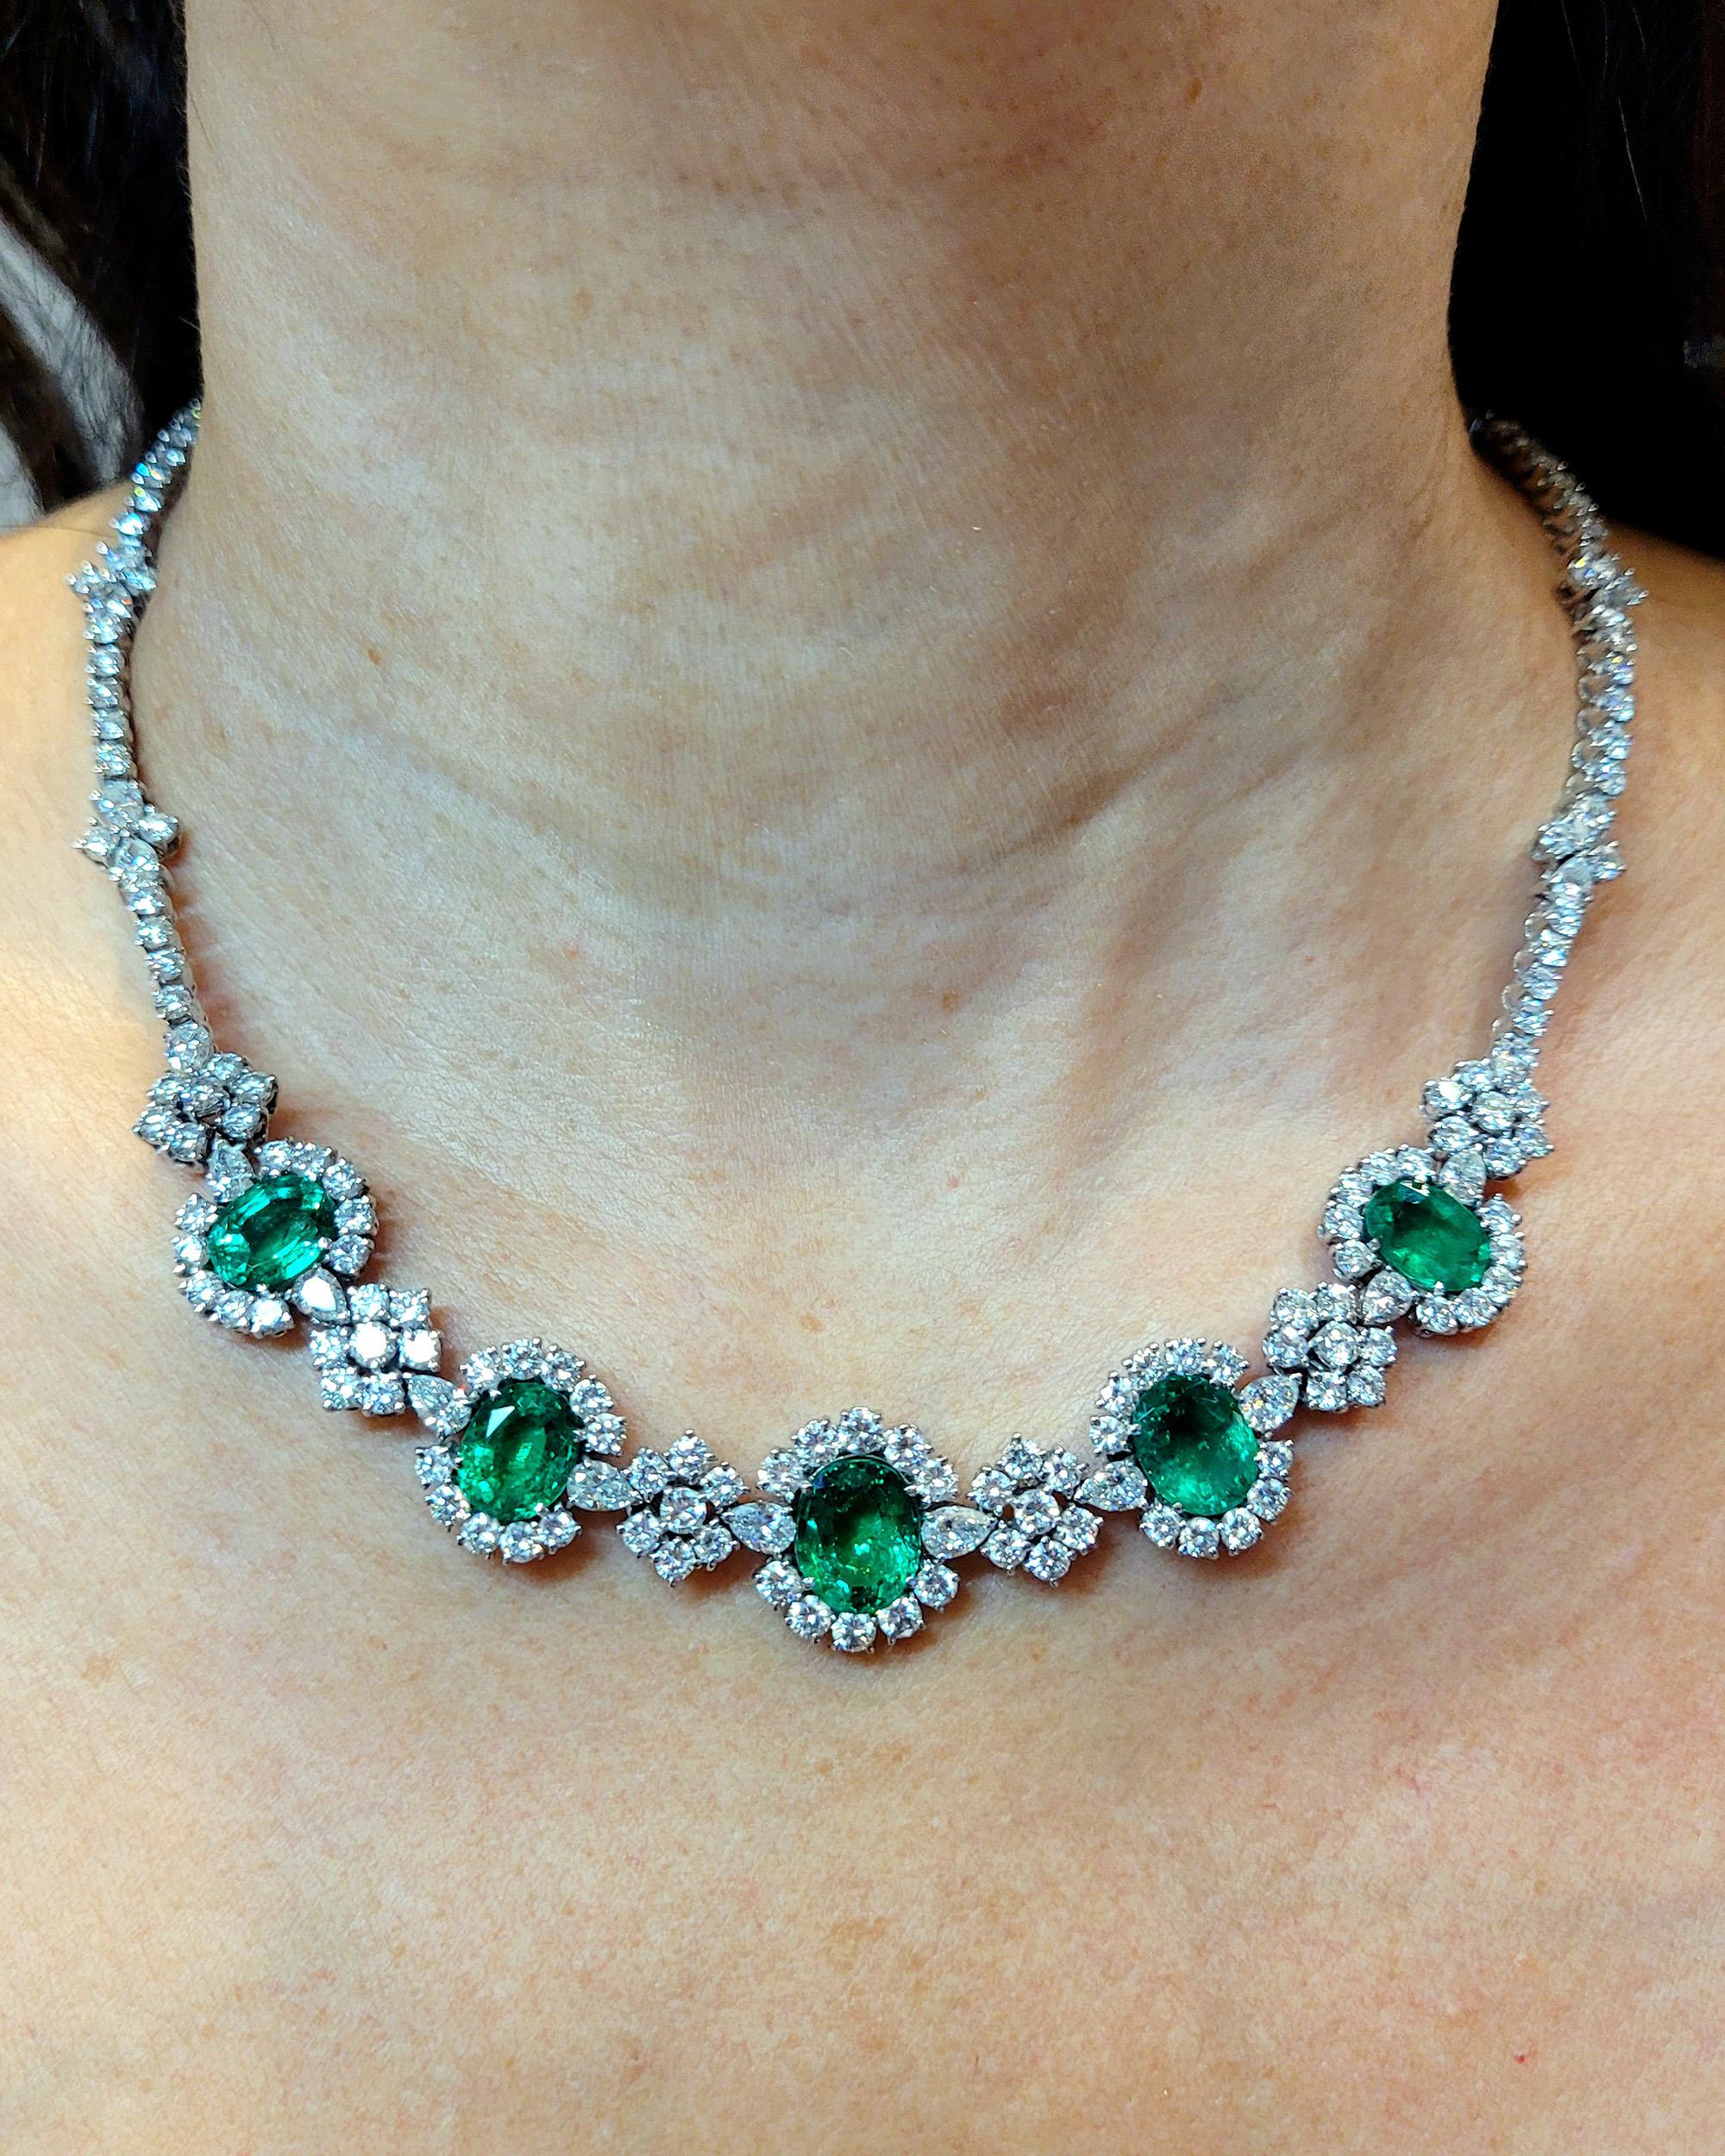 Emerald’s beautiful green color has captivated, soothed, and excited since the times of Cleopatra. The Queen of Ancient Egypt loved using the stones for lavish jewelry, and also considered the verdant gemstones sacred symbols of fertility and